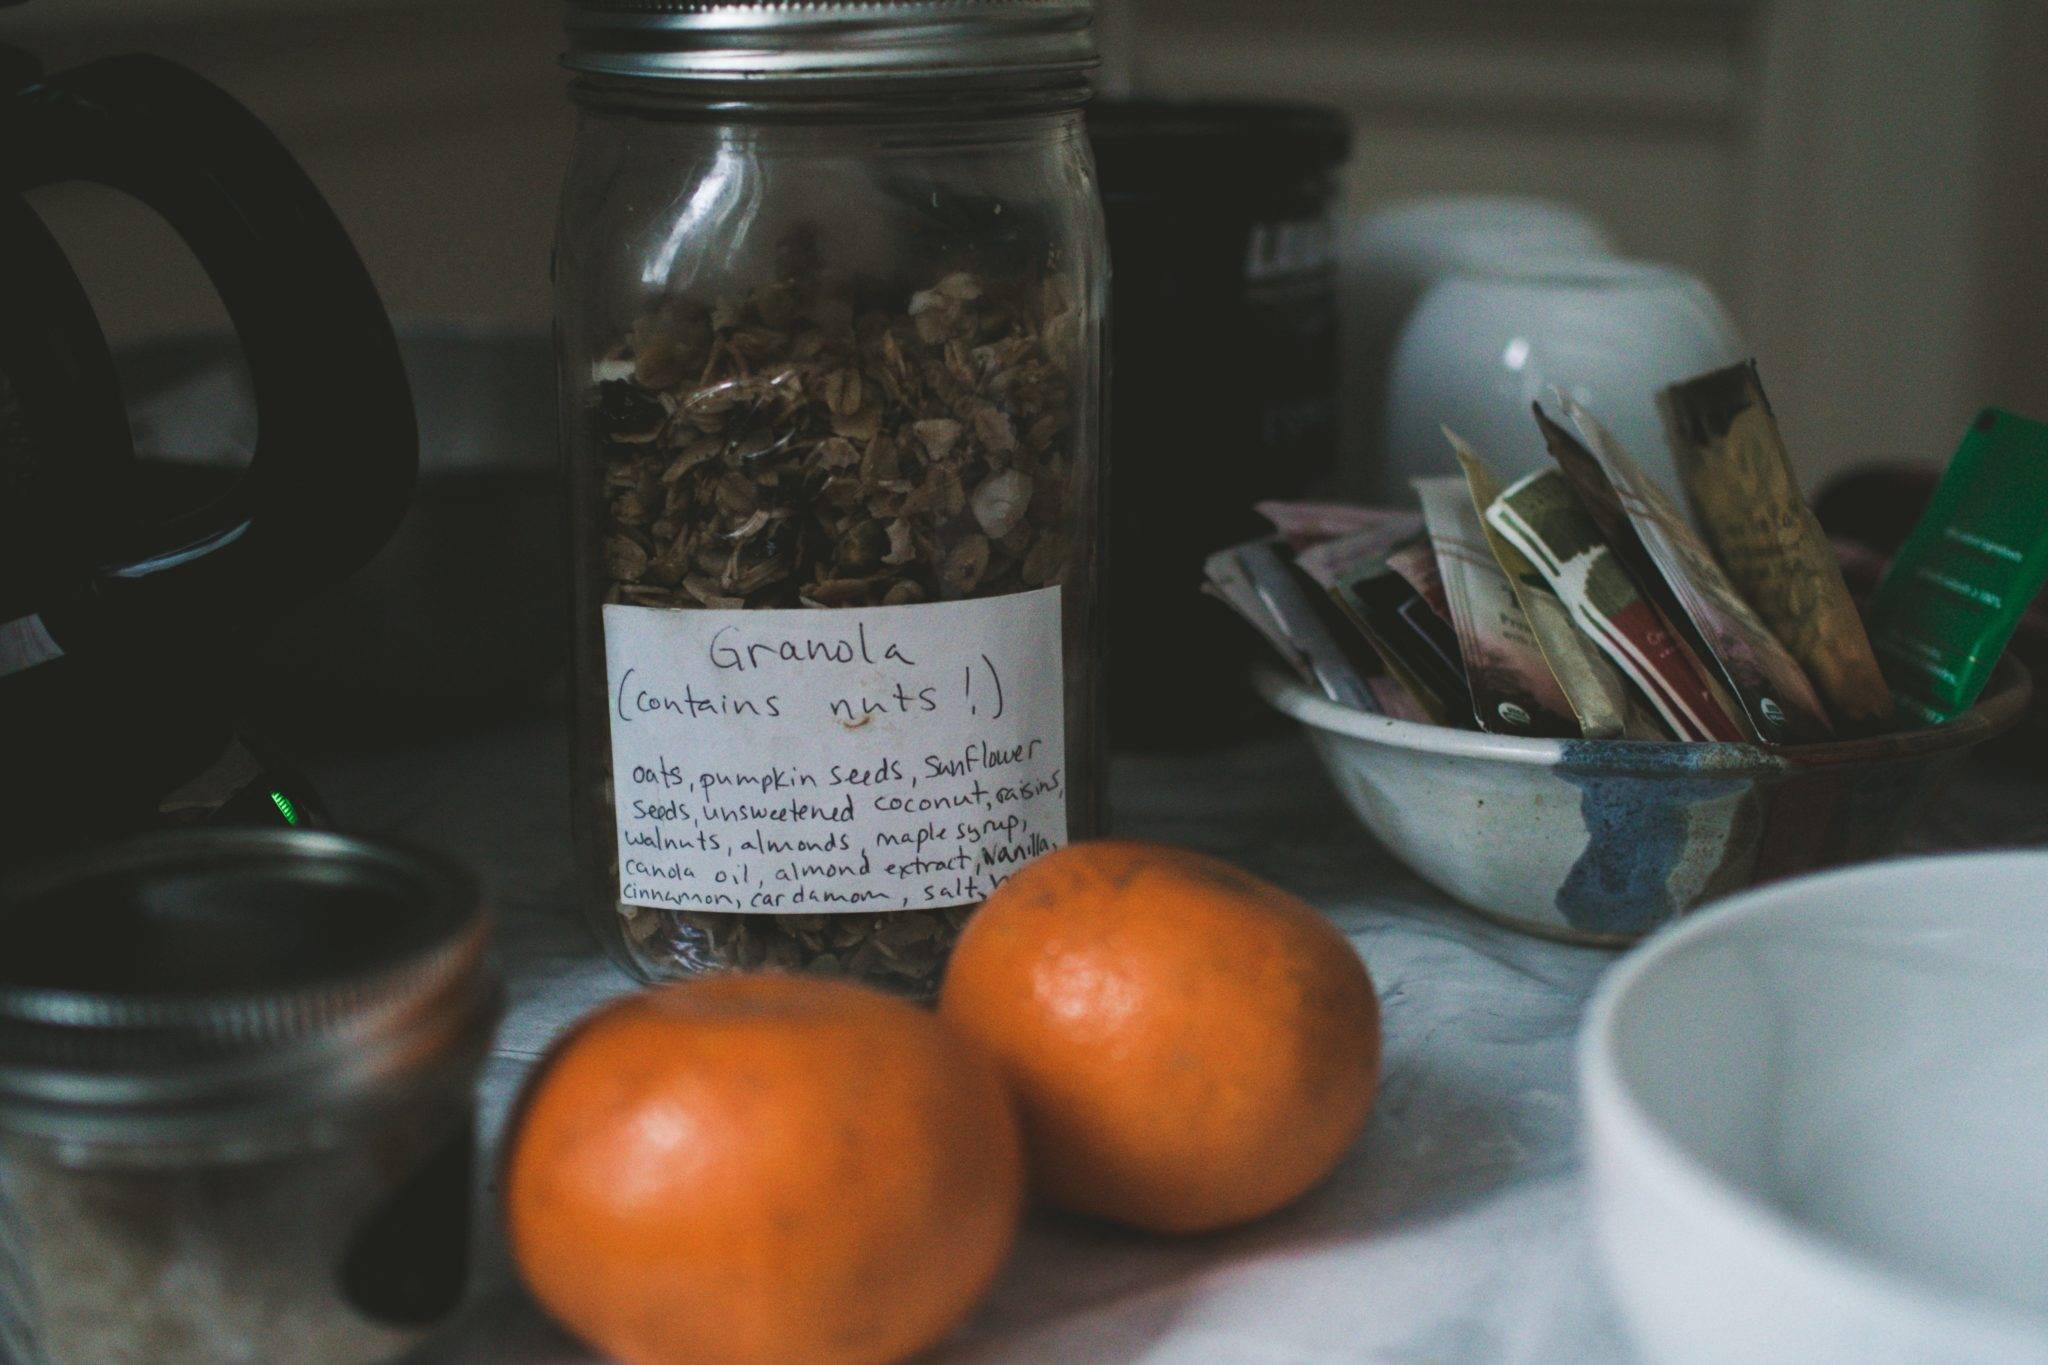 Airbnb Hosting An Airbnb hosting setup includes a jar of granola and oranges on the table.